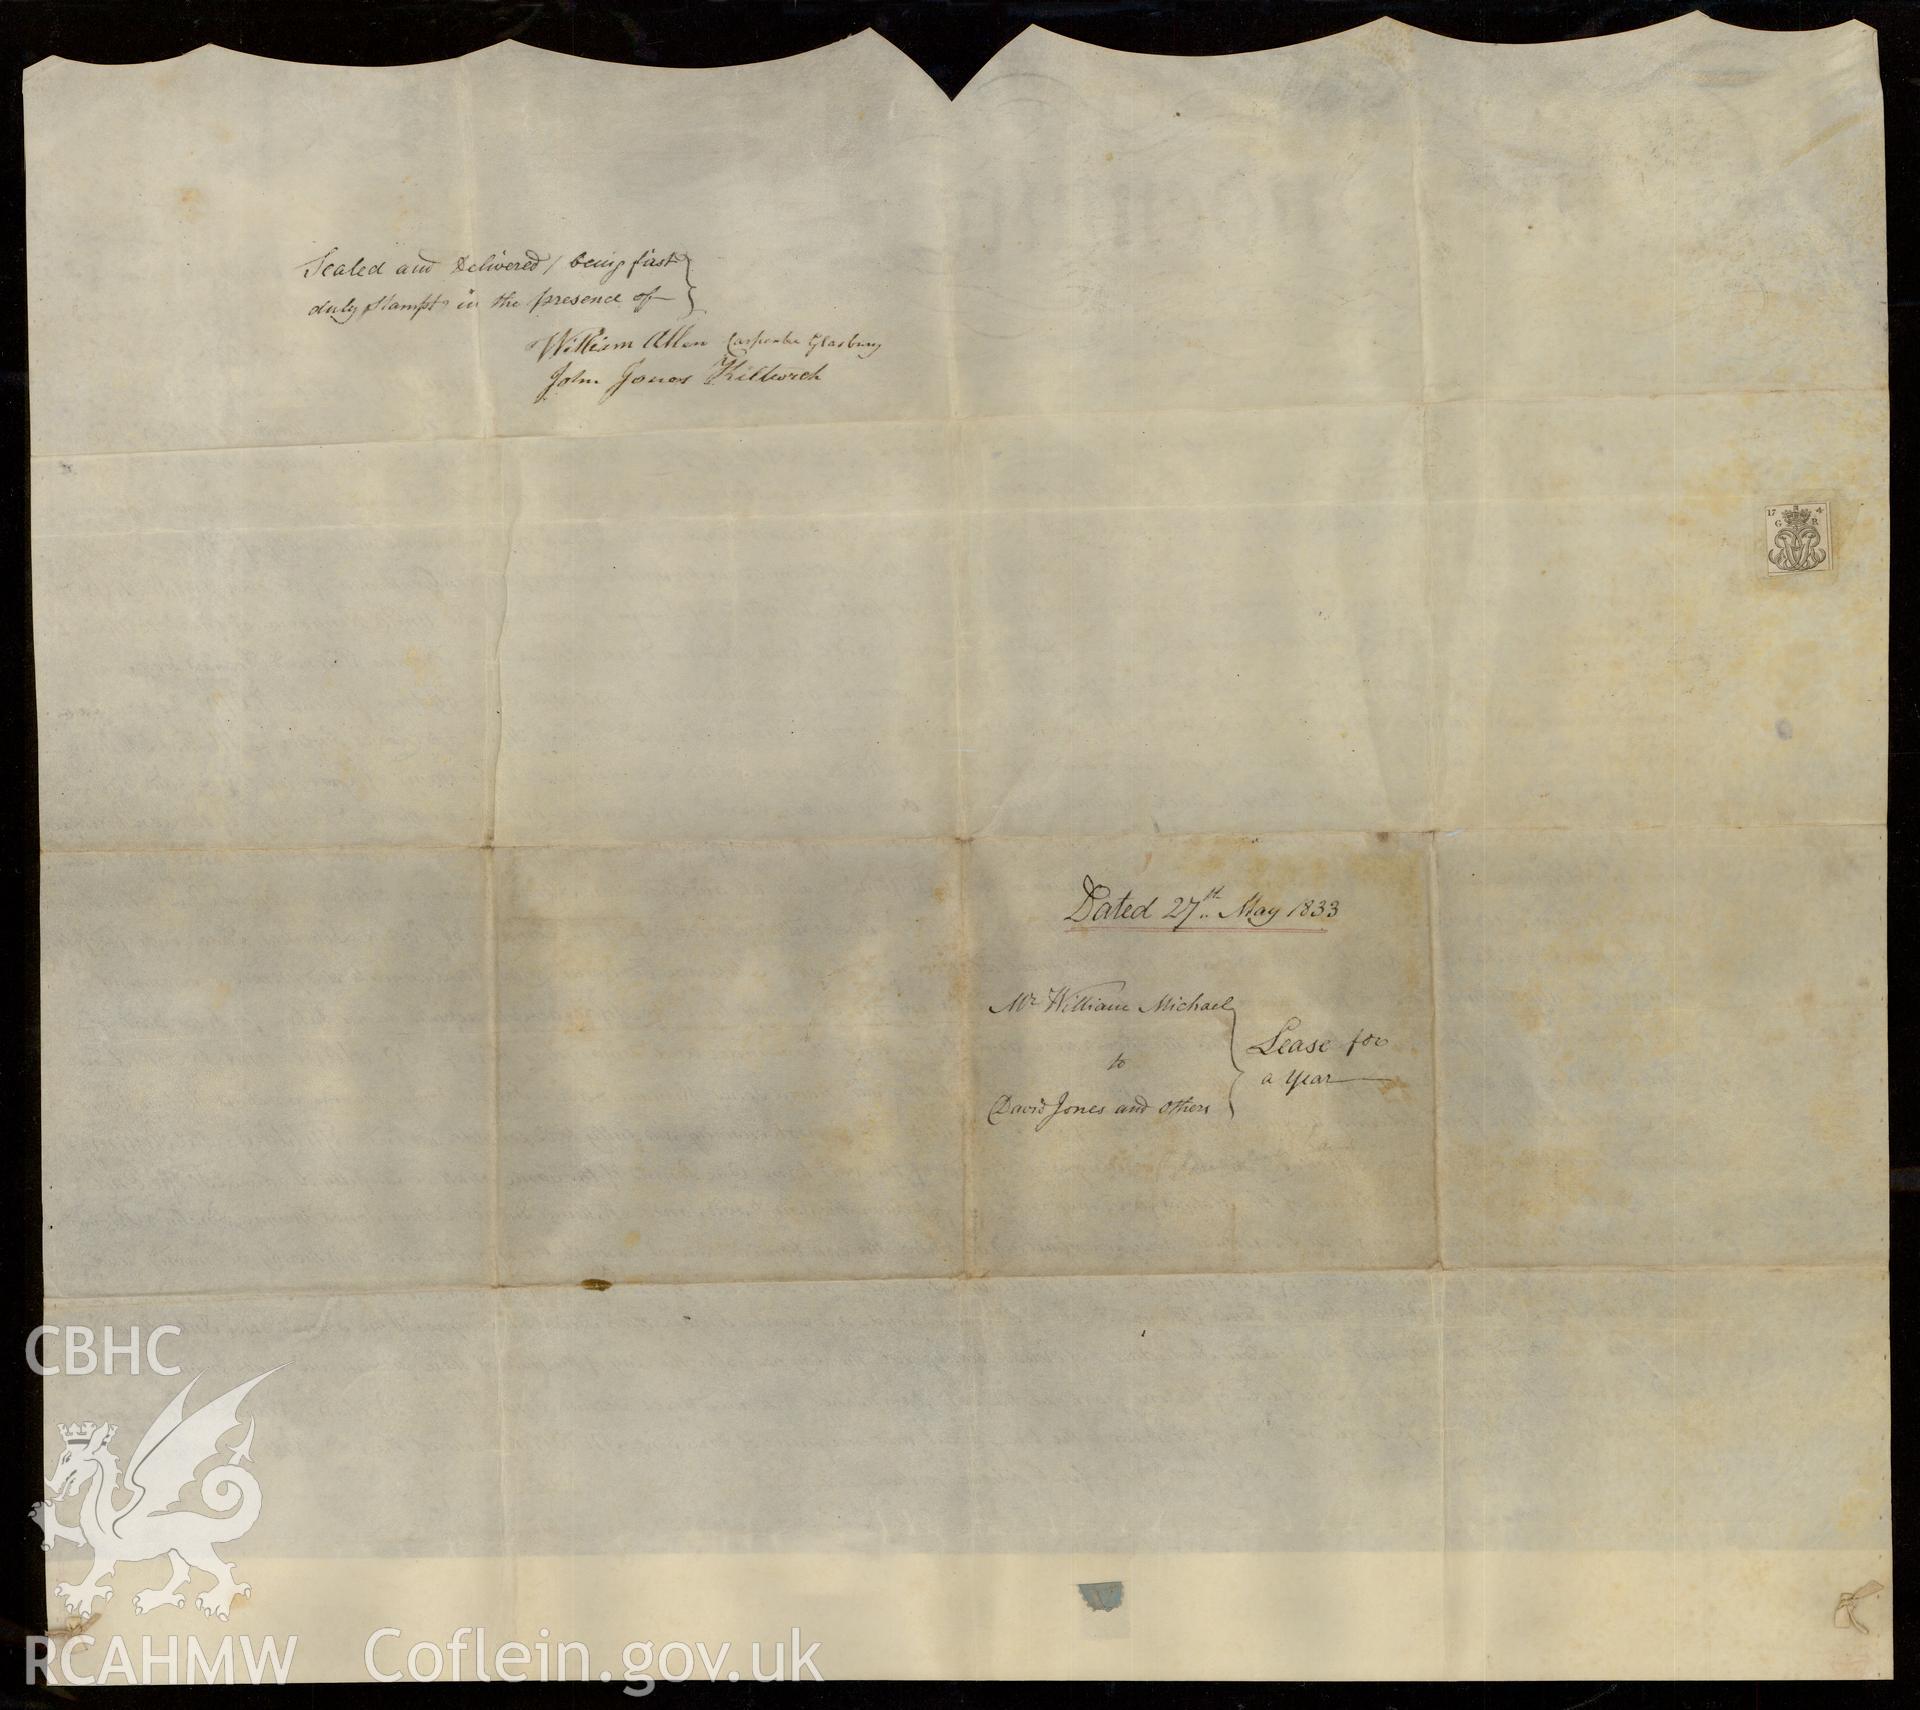 Indenture scrolls of Maes-yr-onen Chapel, loaned for copying by the United Reform Church. Scroll dated 27 May 1833. Reverse view of scroll